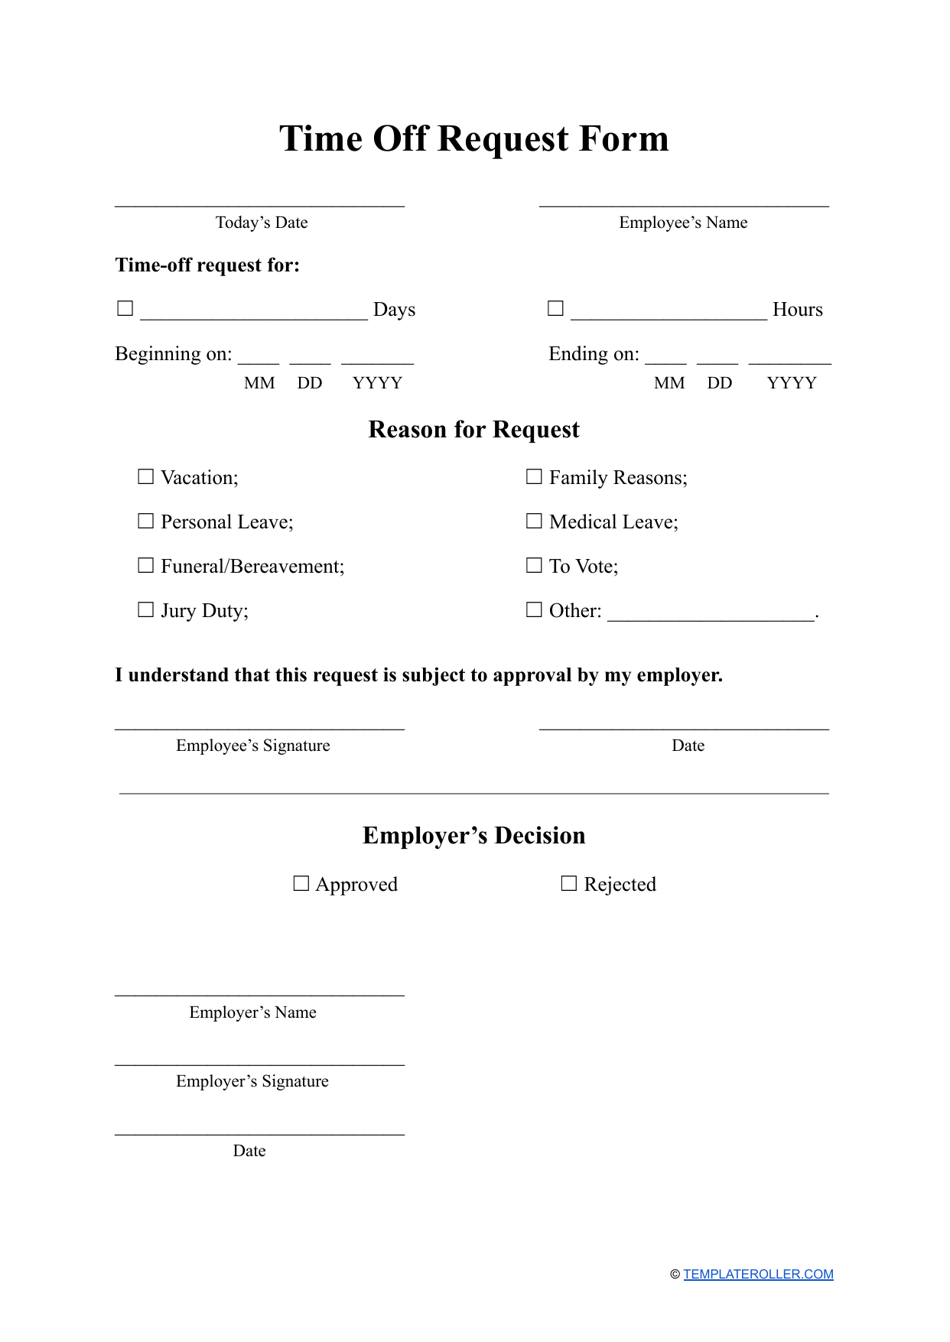 Time off Request Form - Fill Out, Sign Online and Download PDF ...